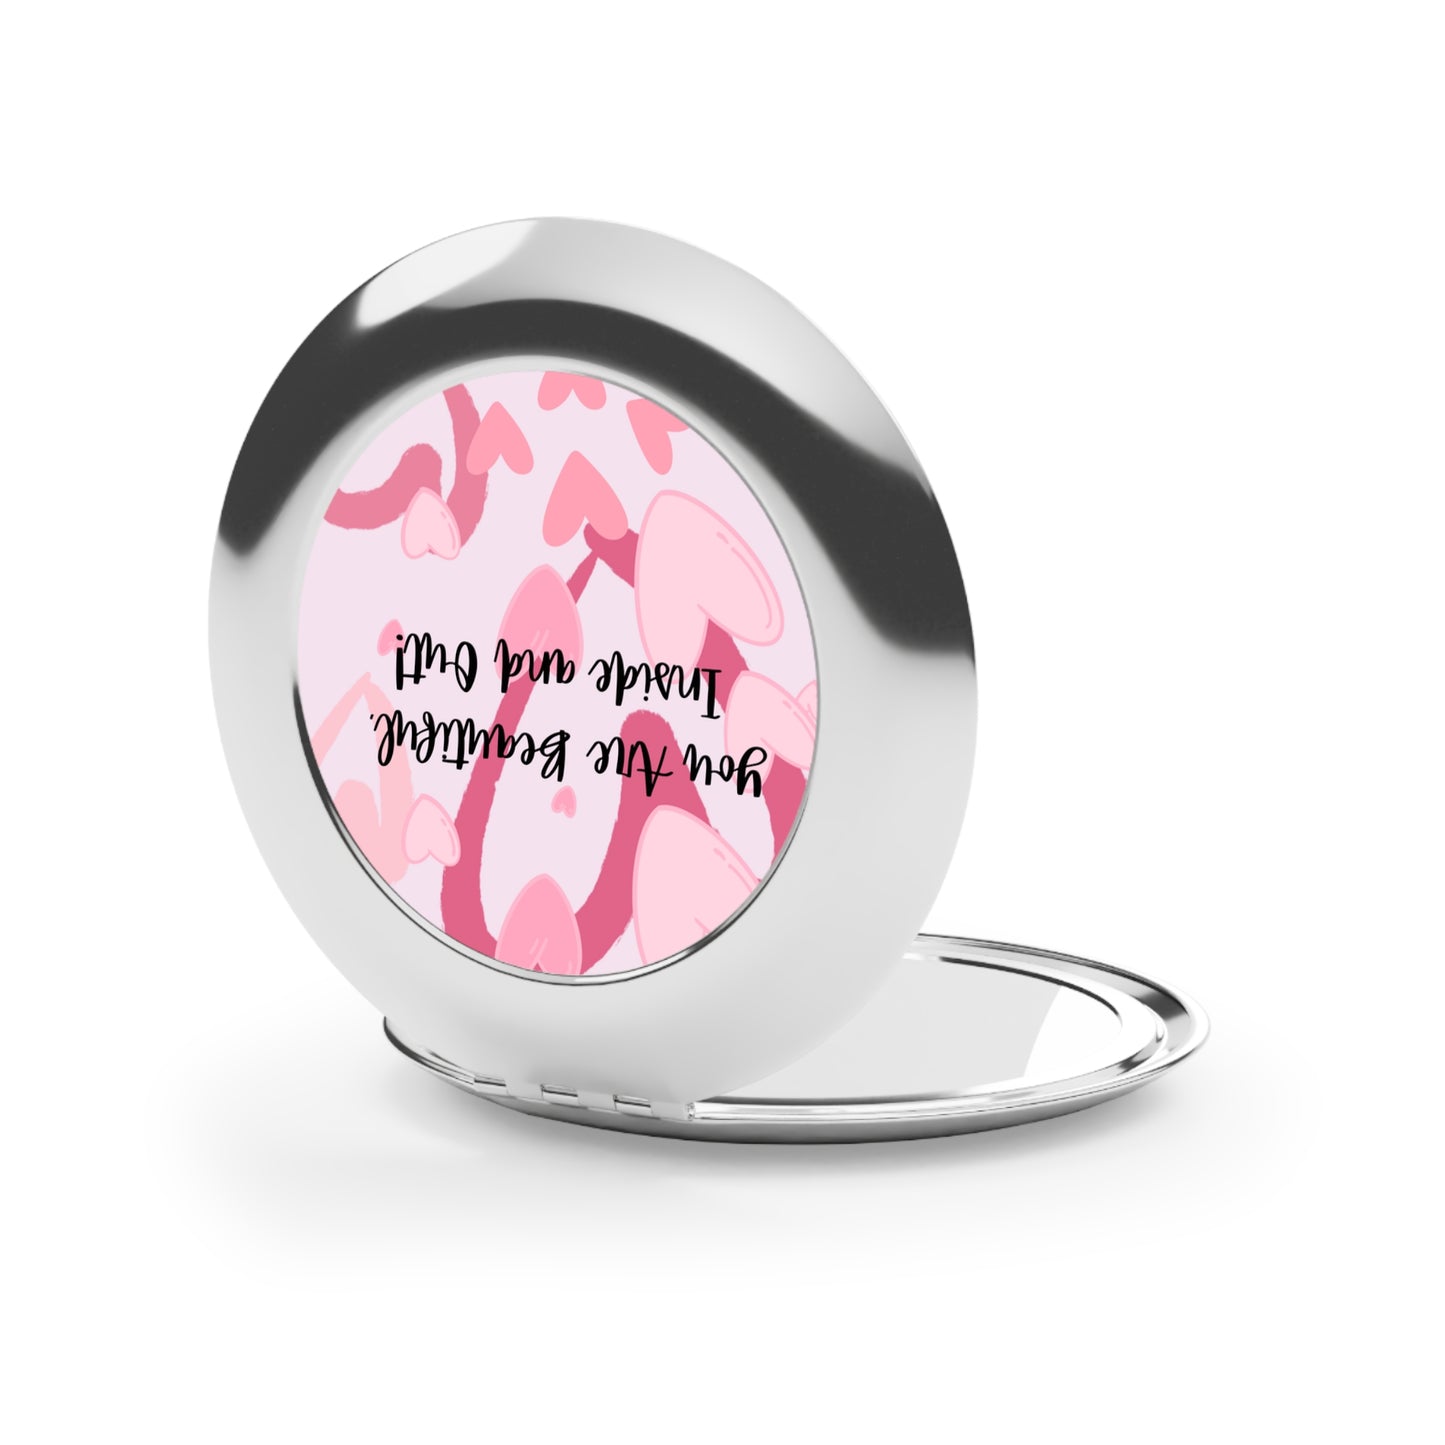 You are Beautiful Inside and Out Compact Travel Mirror